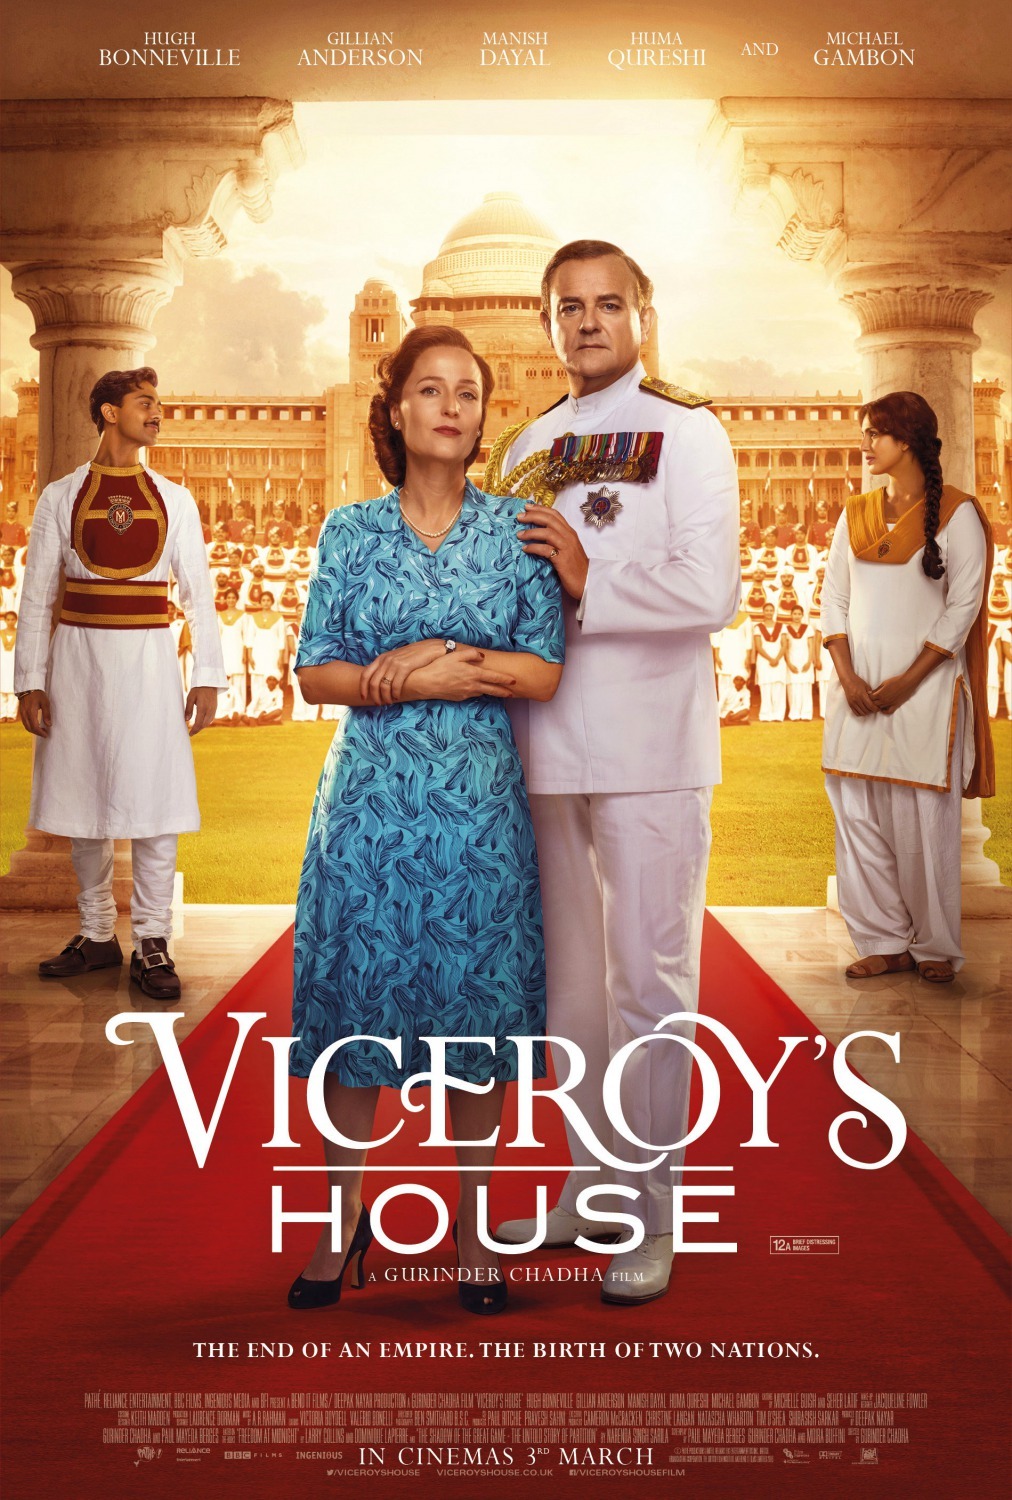 The Viceroy's House (2017) Google image from https://www.imdb.com/title/tt4977530/